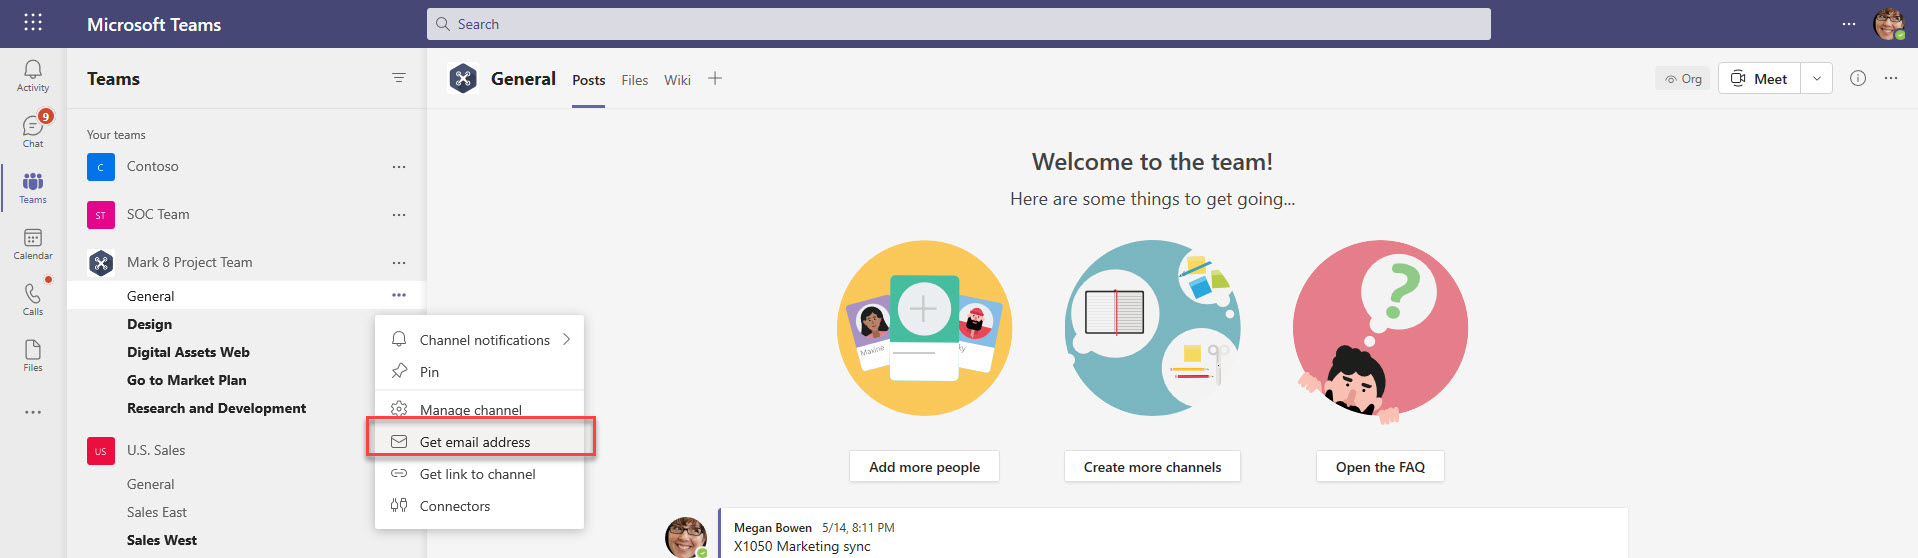 How to email a channel in Microsoft Teams